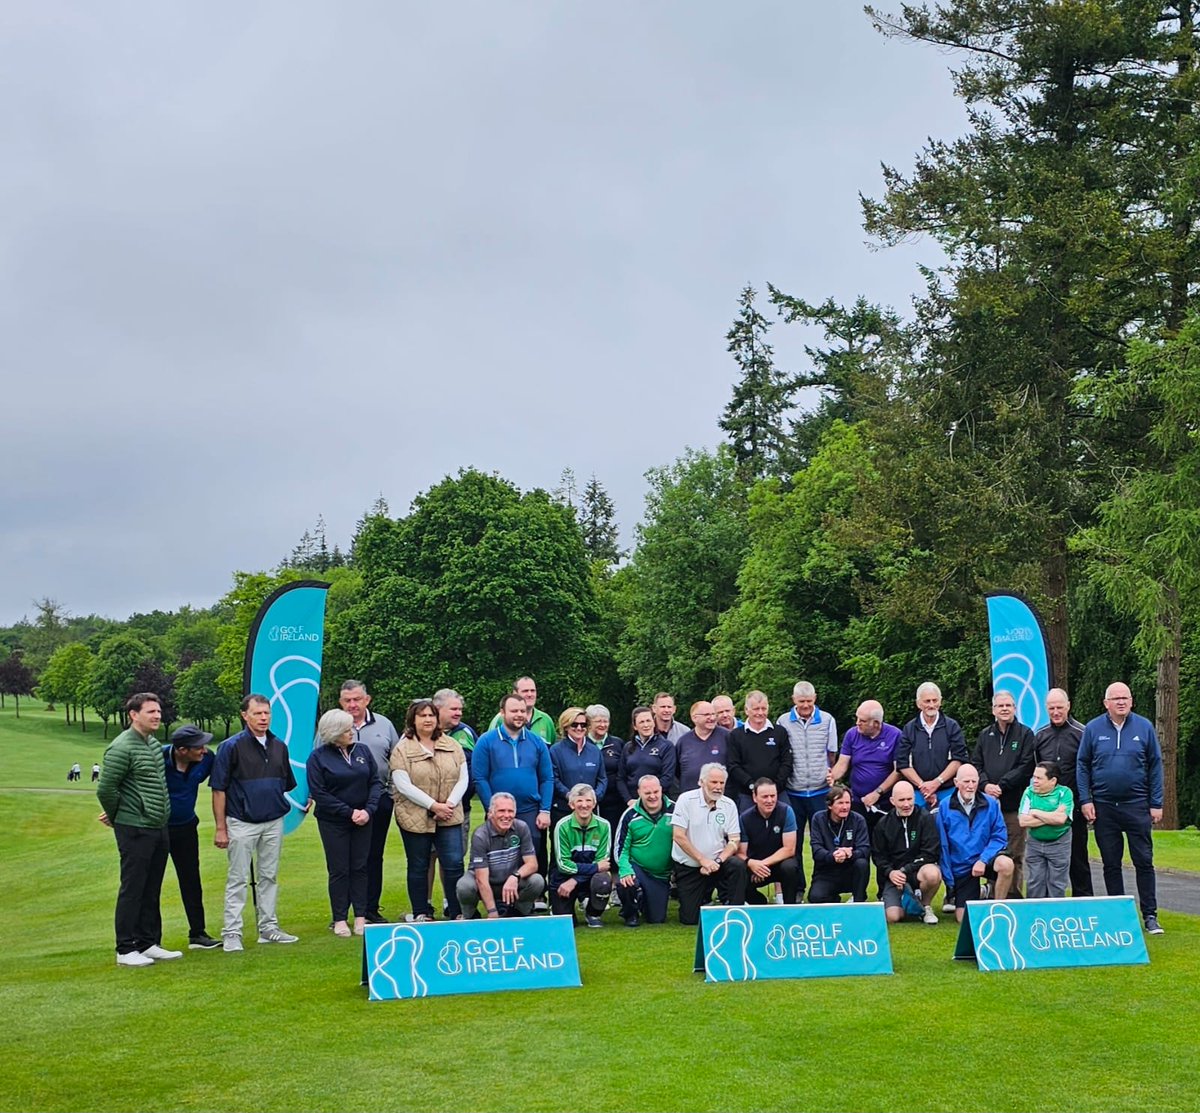 Our next All-Abilities Event in collaboration with DIGA takes place on 12th May at @portumnagc ⛳ Players looking to register can do so here: golfireland.biz/3JJD58s